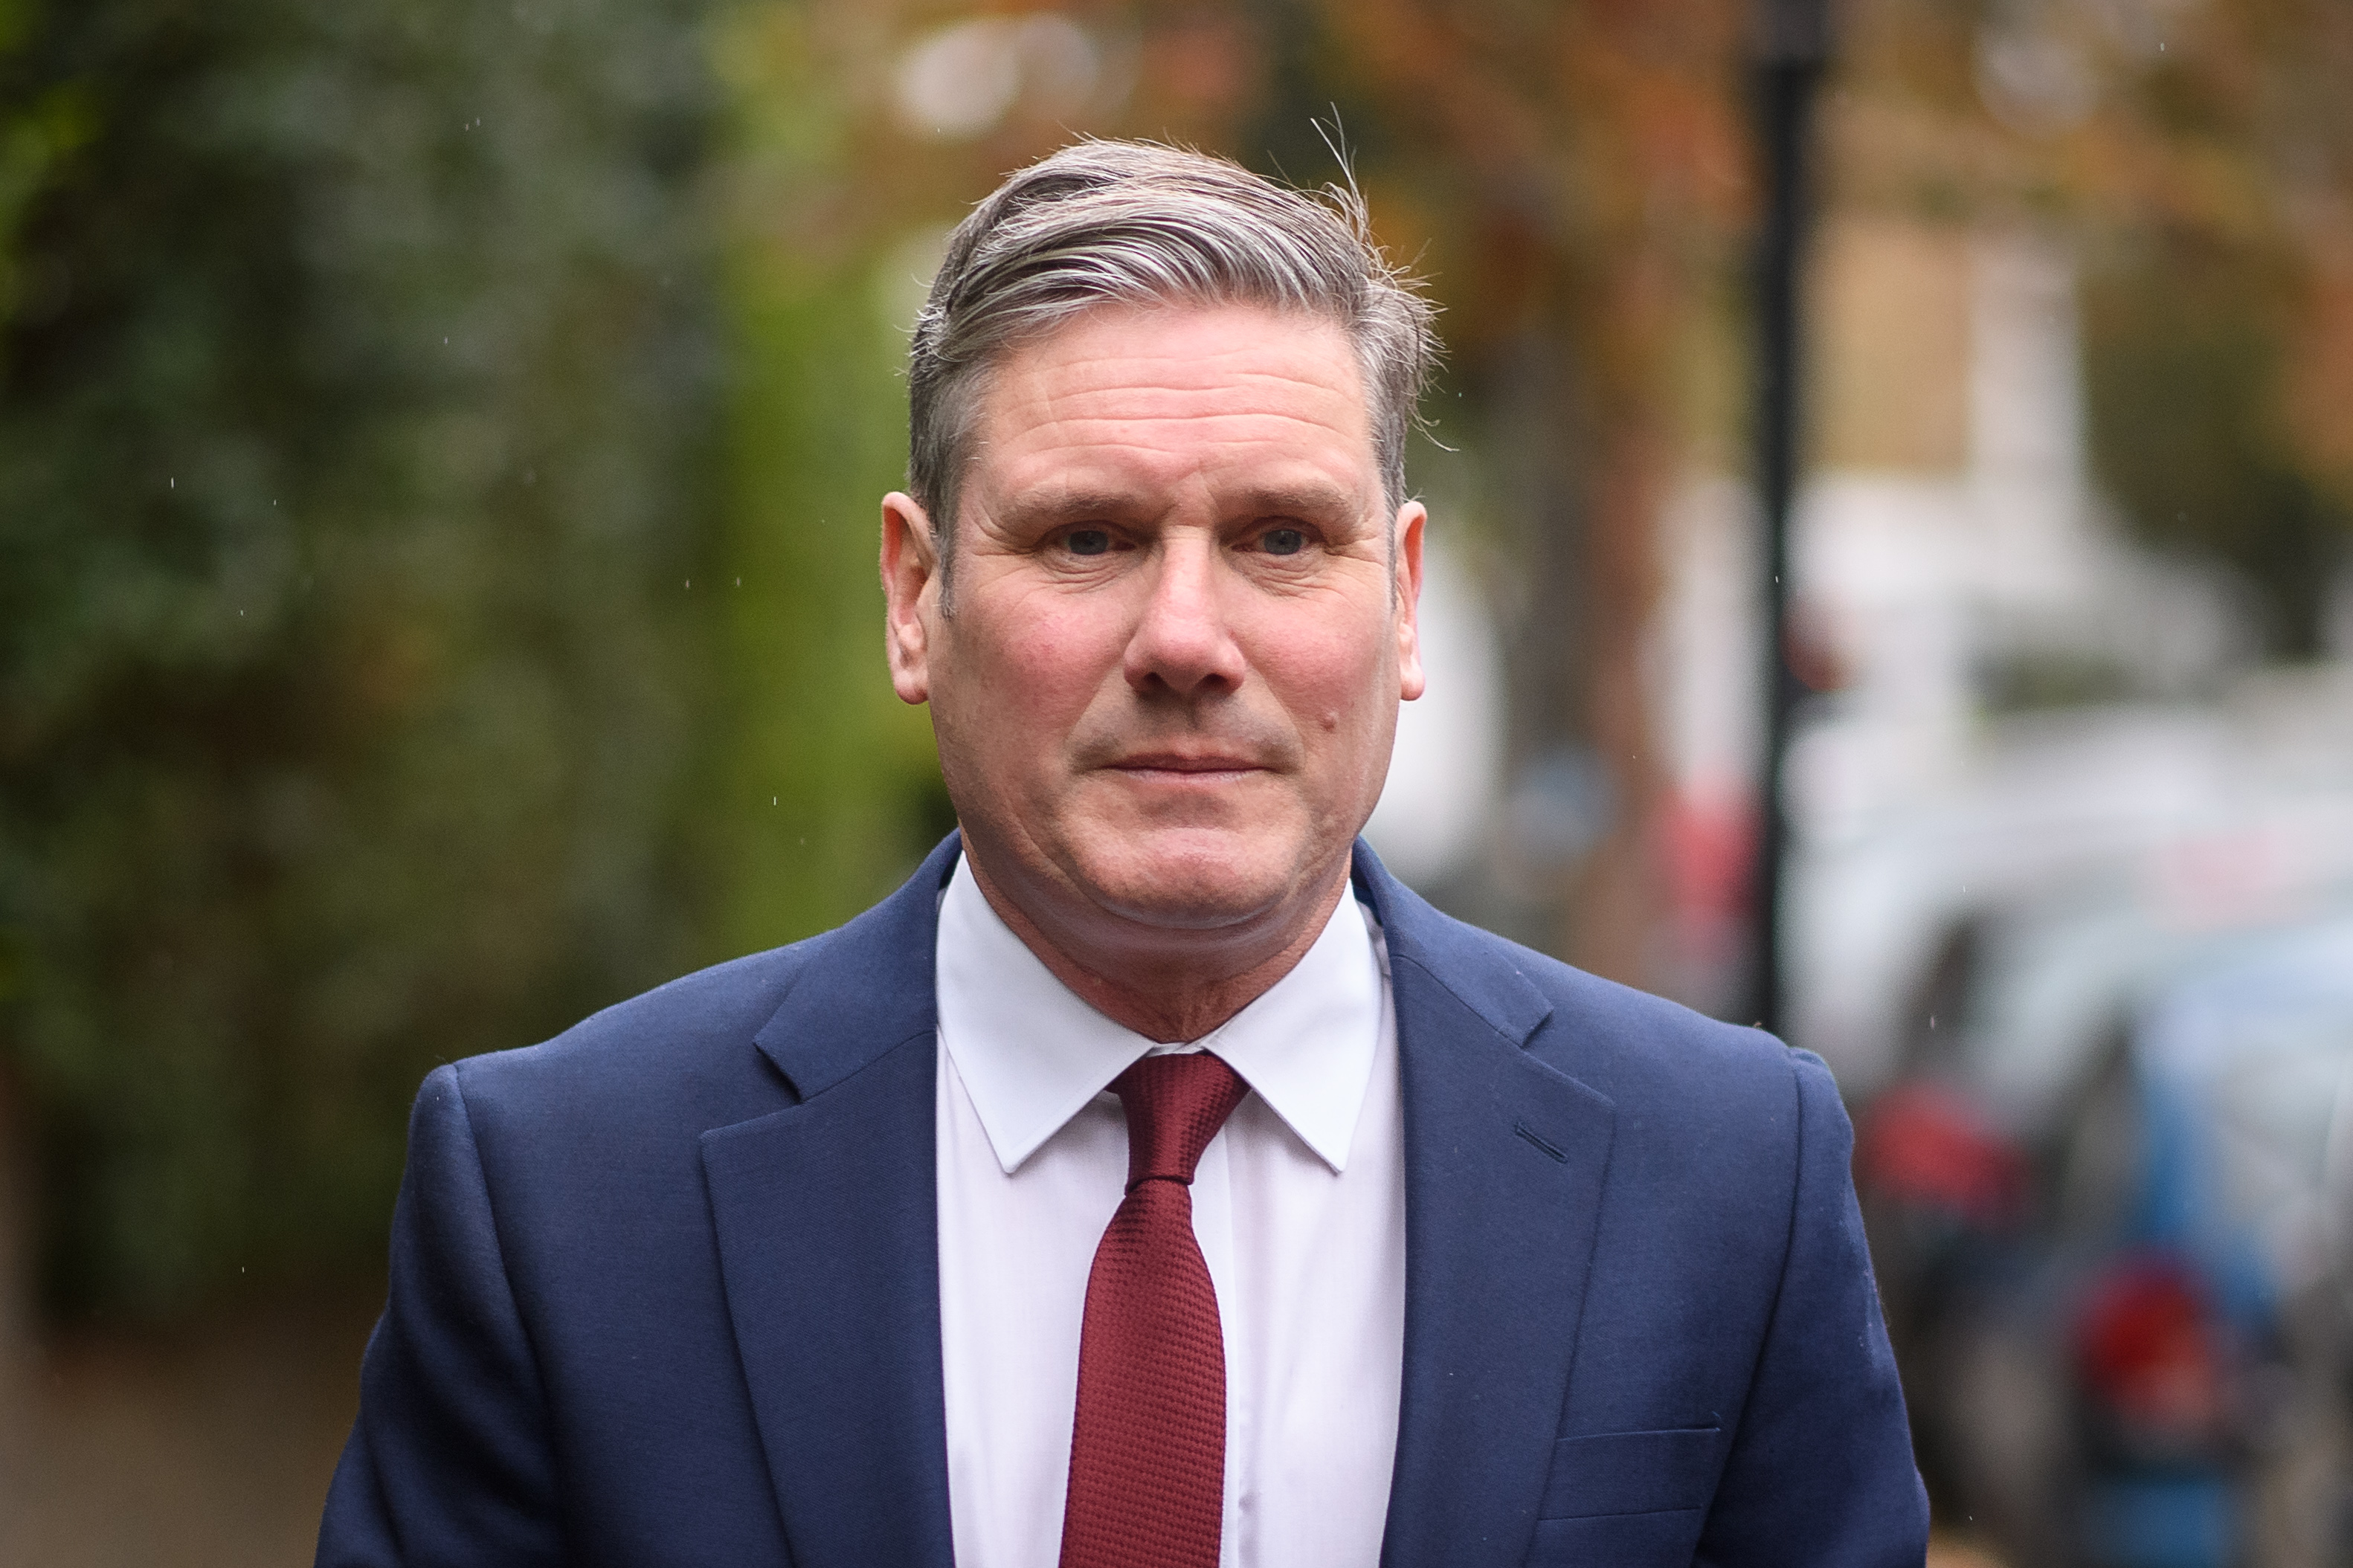 Labour leader Sir Keir Starmer has called for a general election.